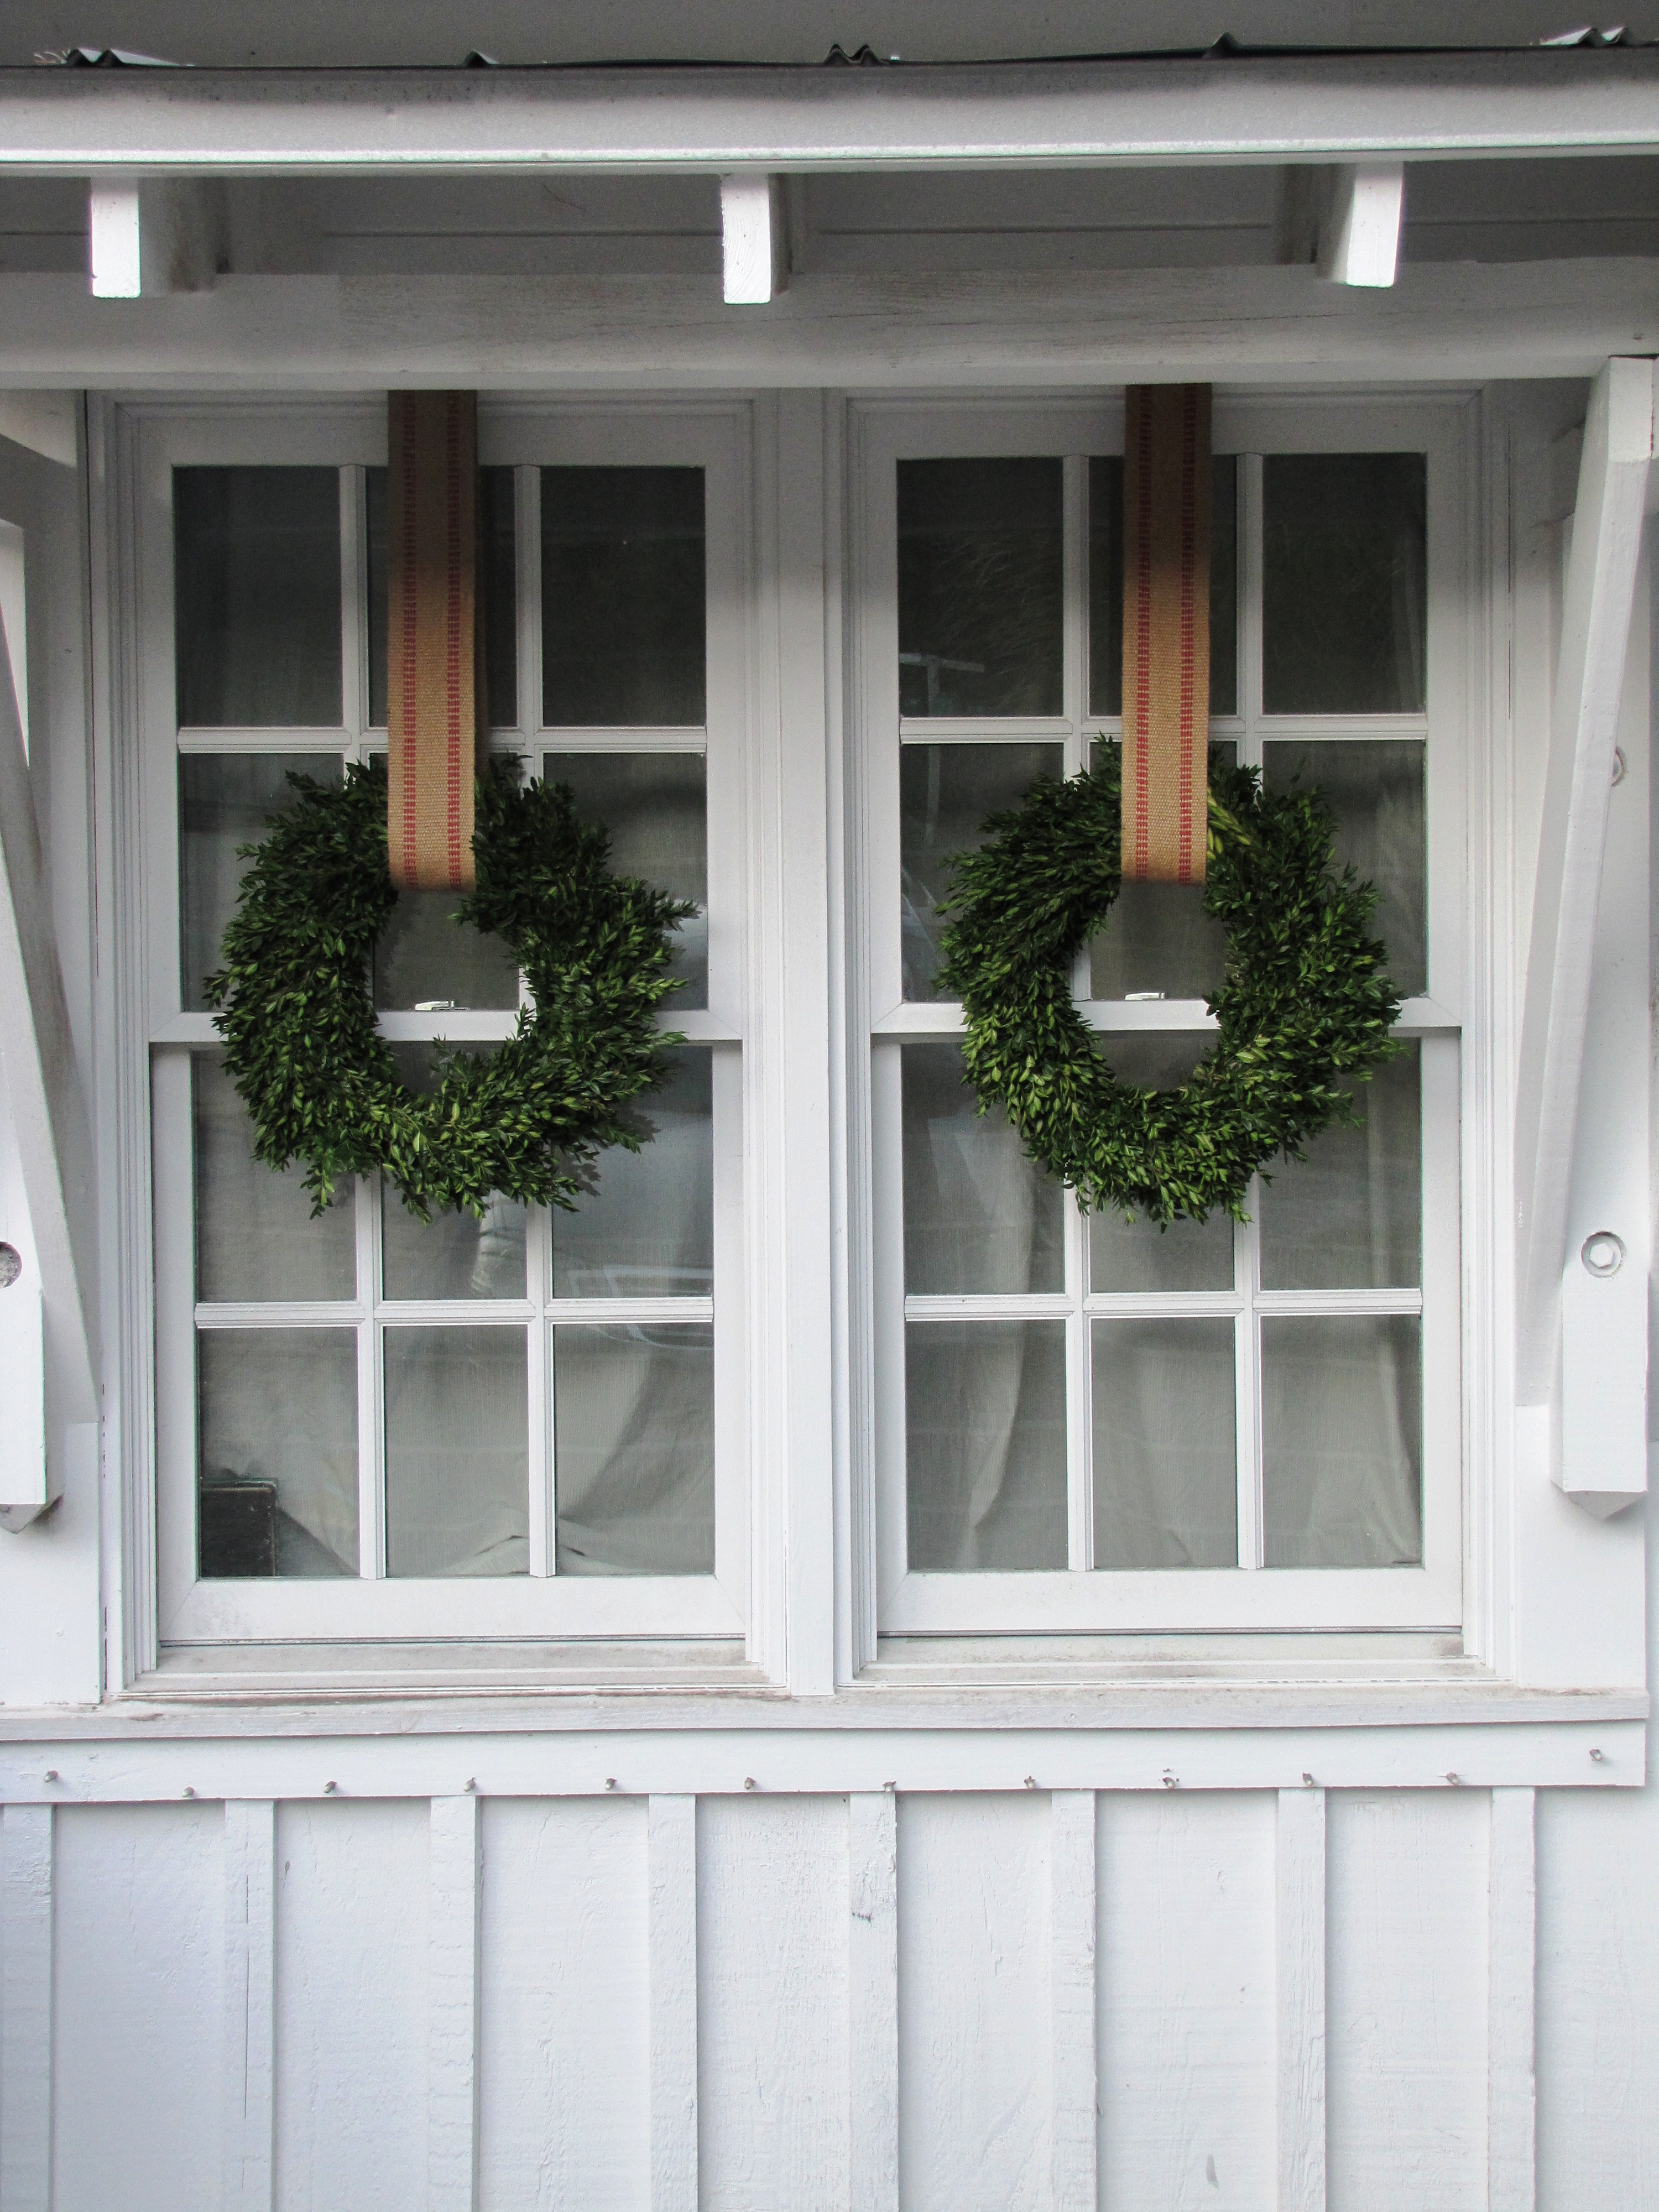 Hanging Wreaths On Windows for Christmas